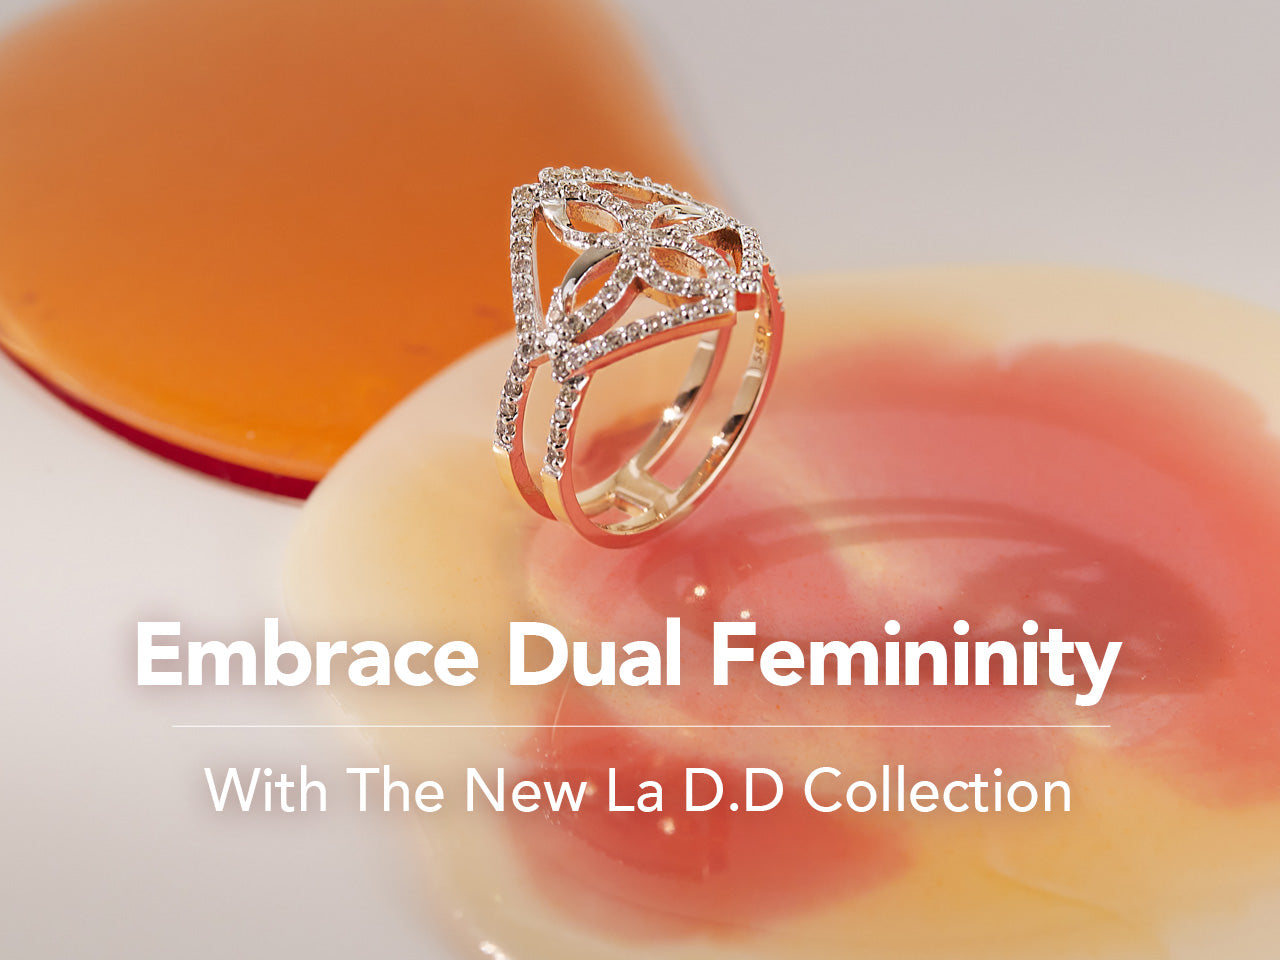 Embrace Dual Femininity With The New La D.D Collection